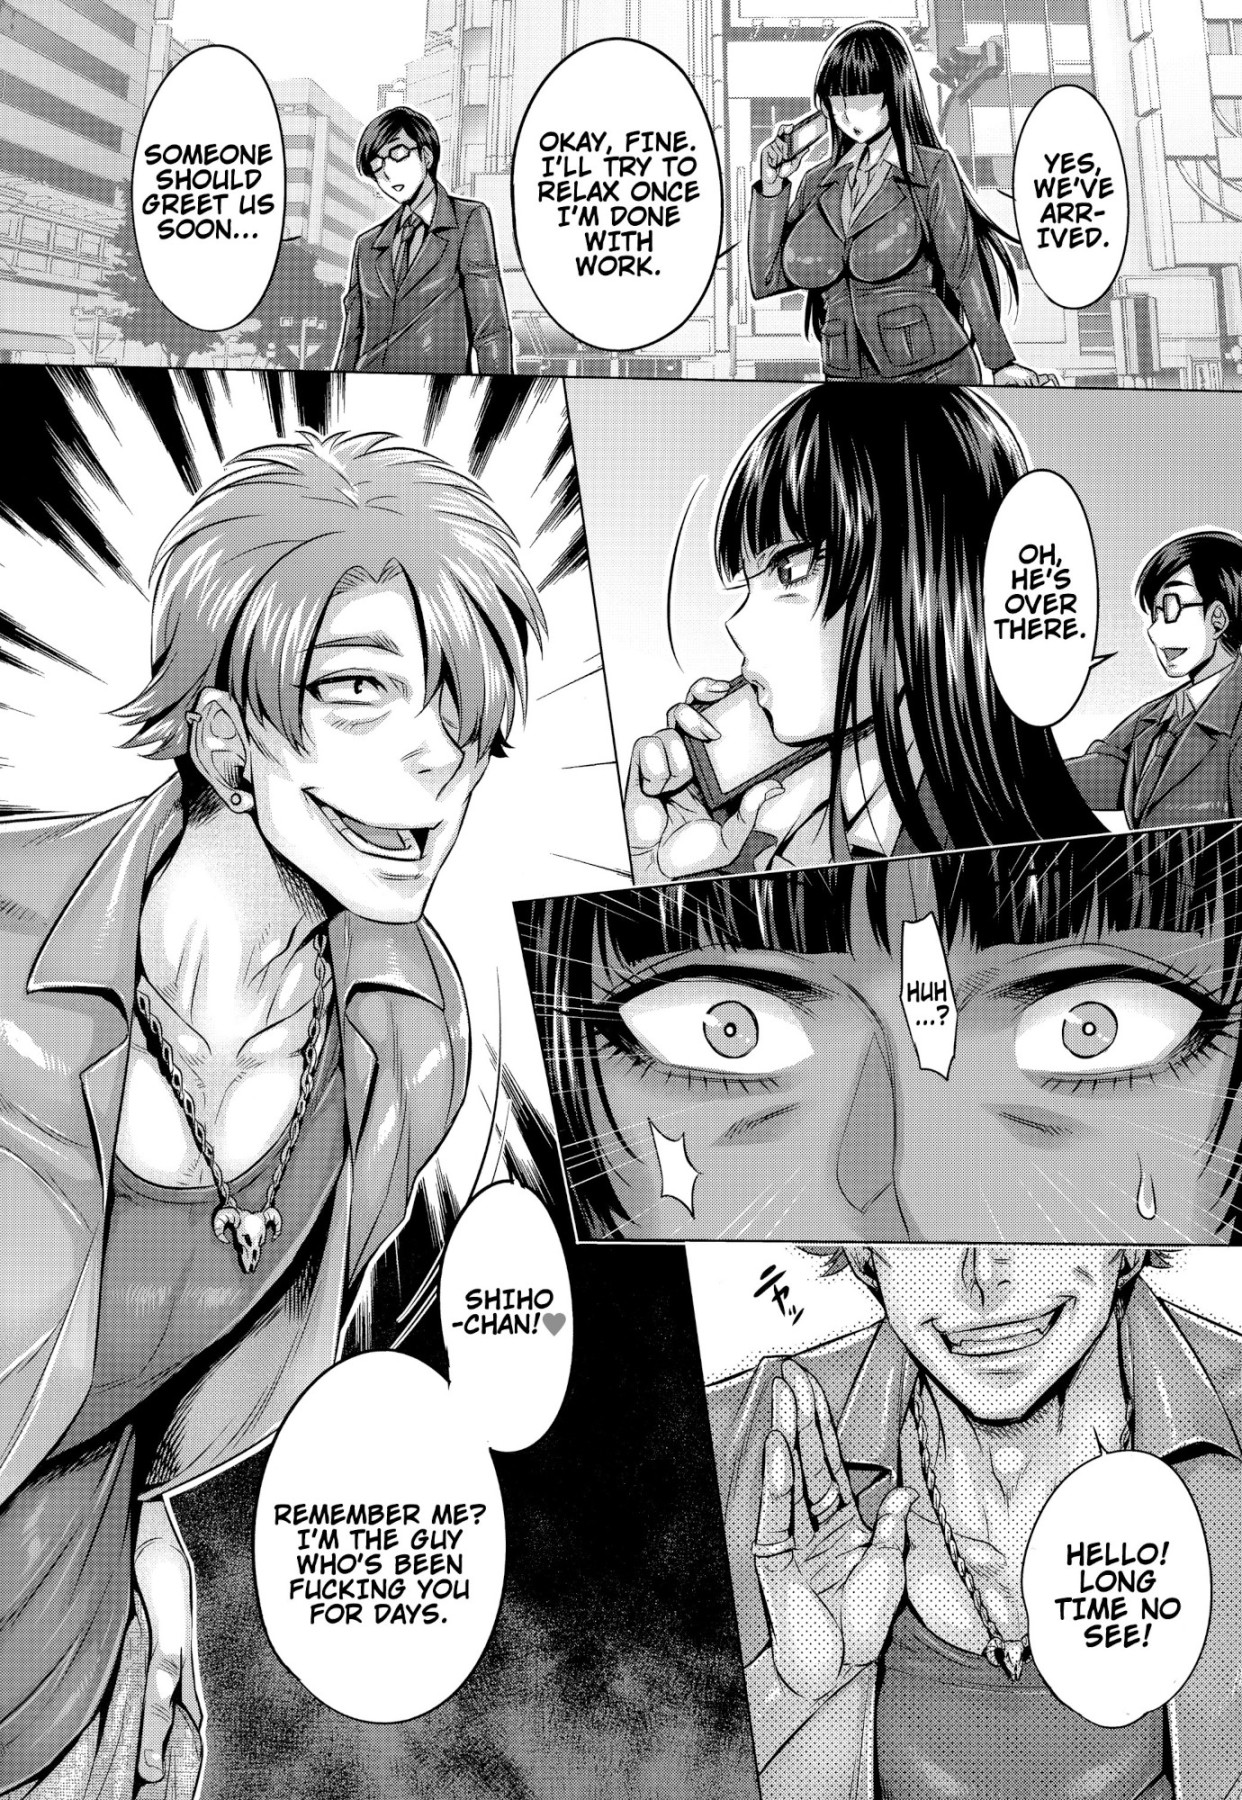 Hentai Manga Comic-Records Of The Perverted Fall Of The Forced Mind Controlled Family Head-Read-4